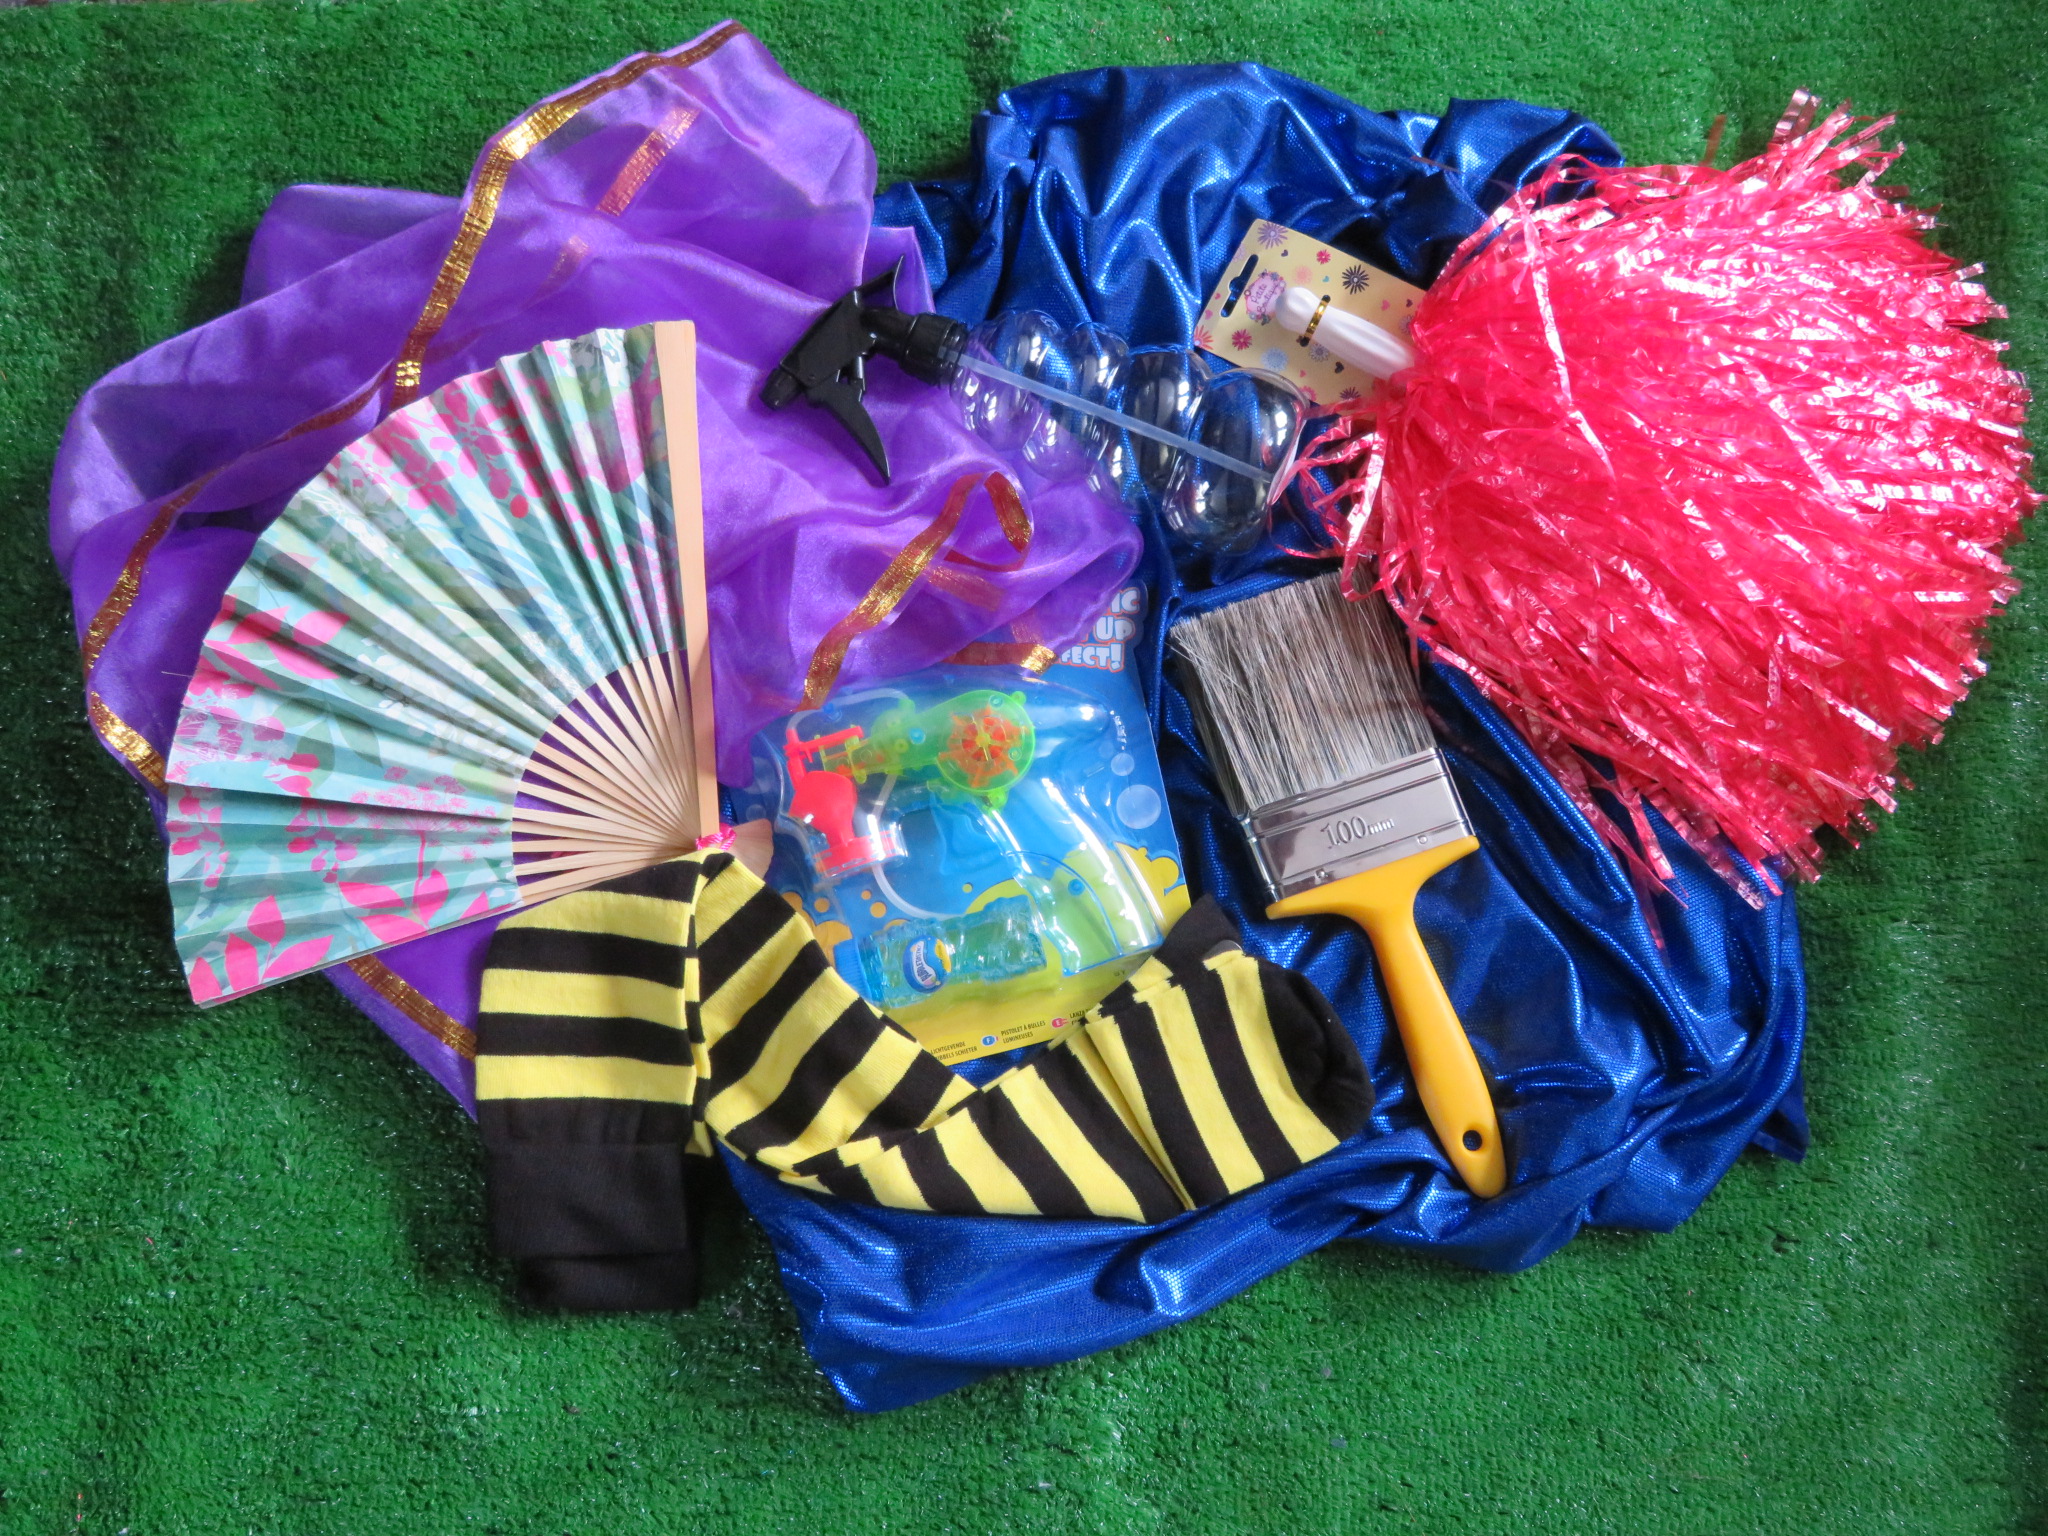 photo of the crafty and playfun object such as cheerleading pom pom and a paint brush